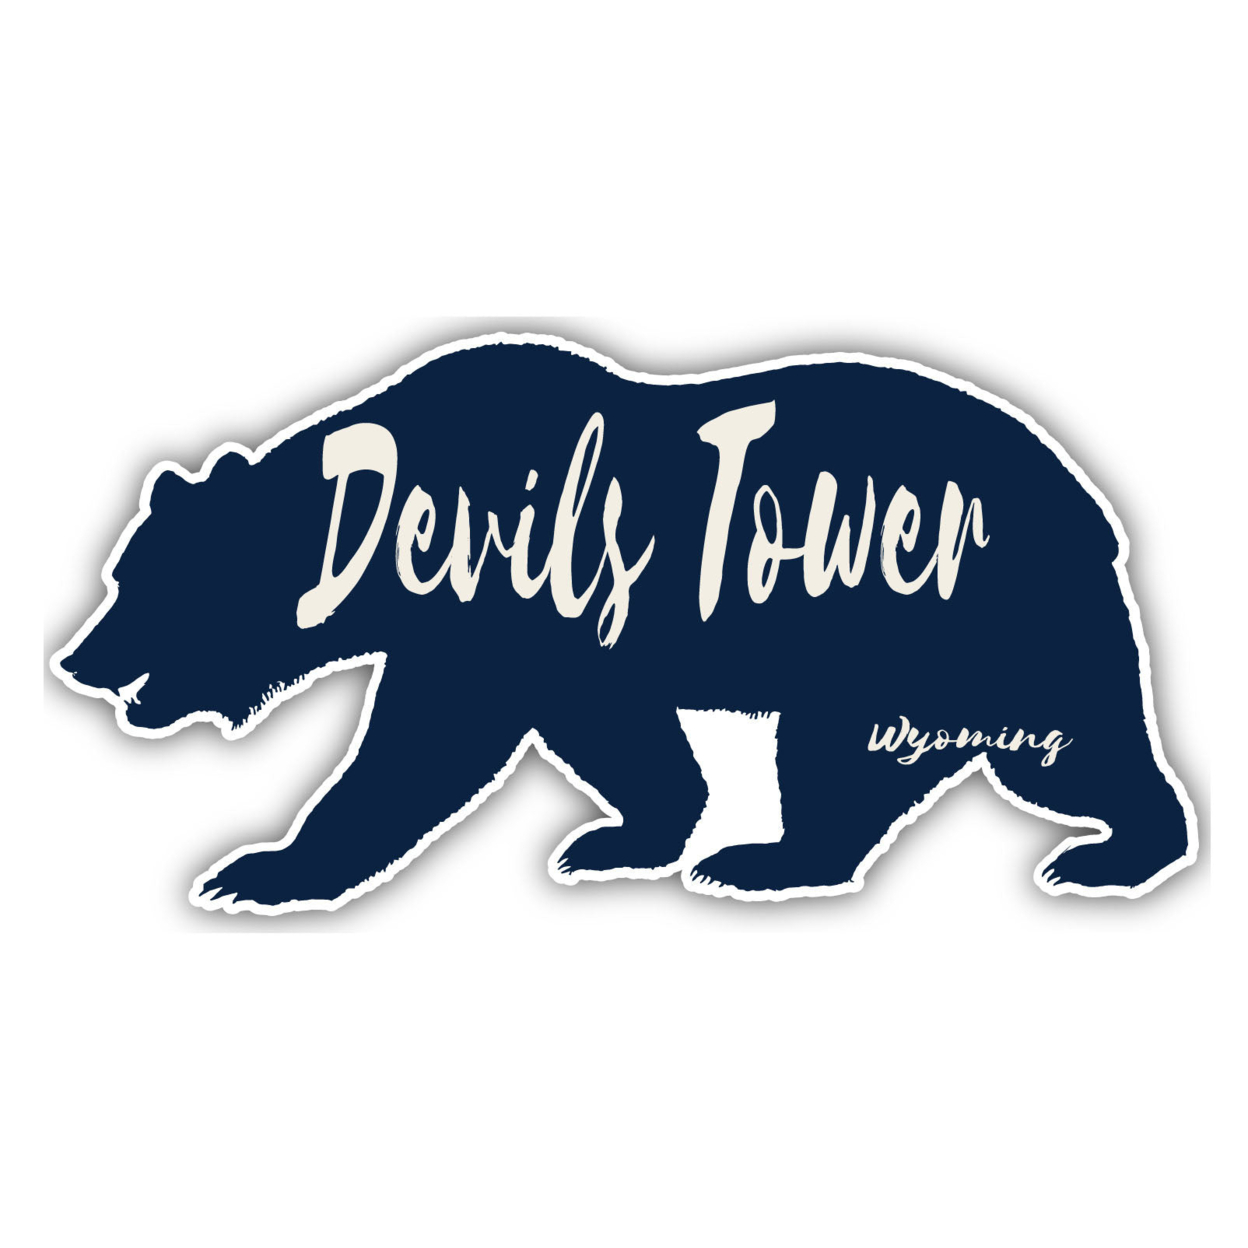 Devils Tower Wyoming Souvenir Decorative Stickers (Choose Theme And Size) - 4-Pack, 4-Inch, Bear